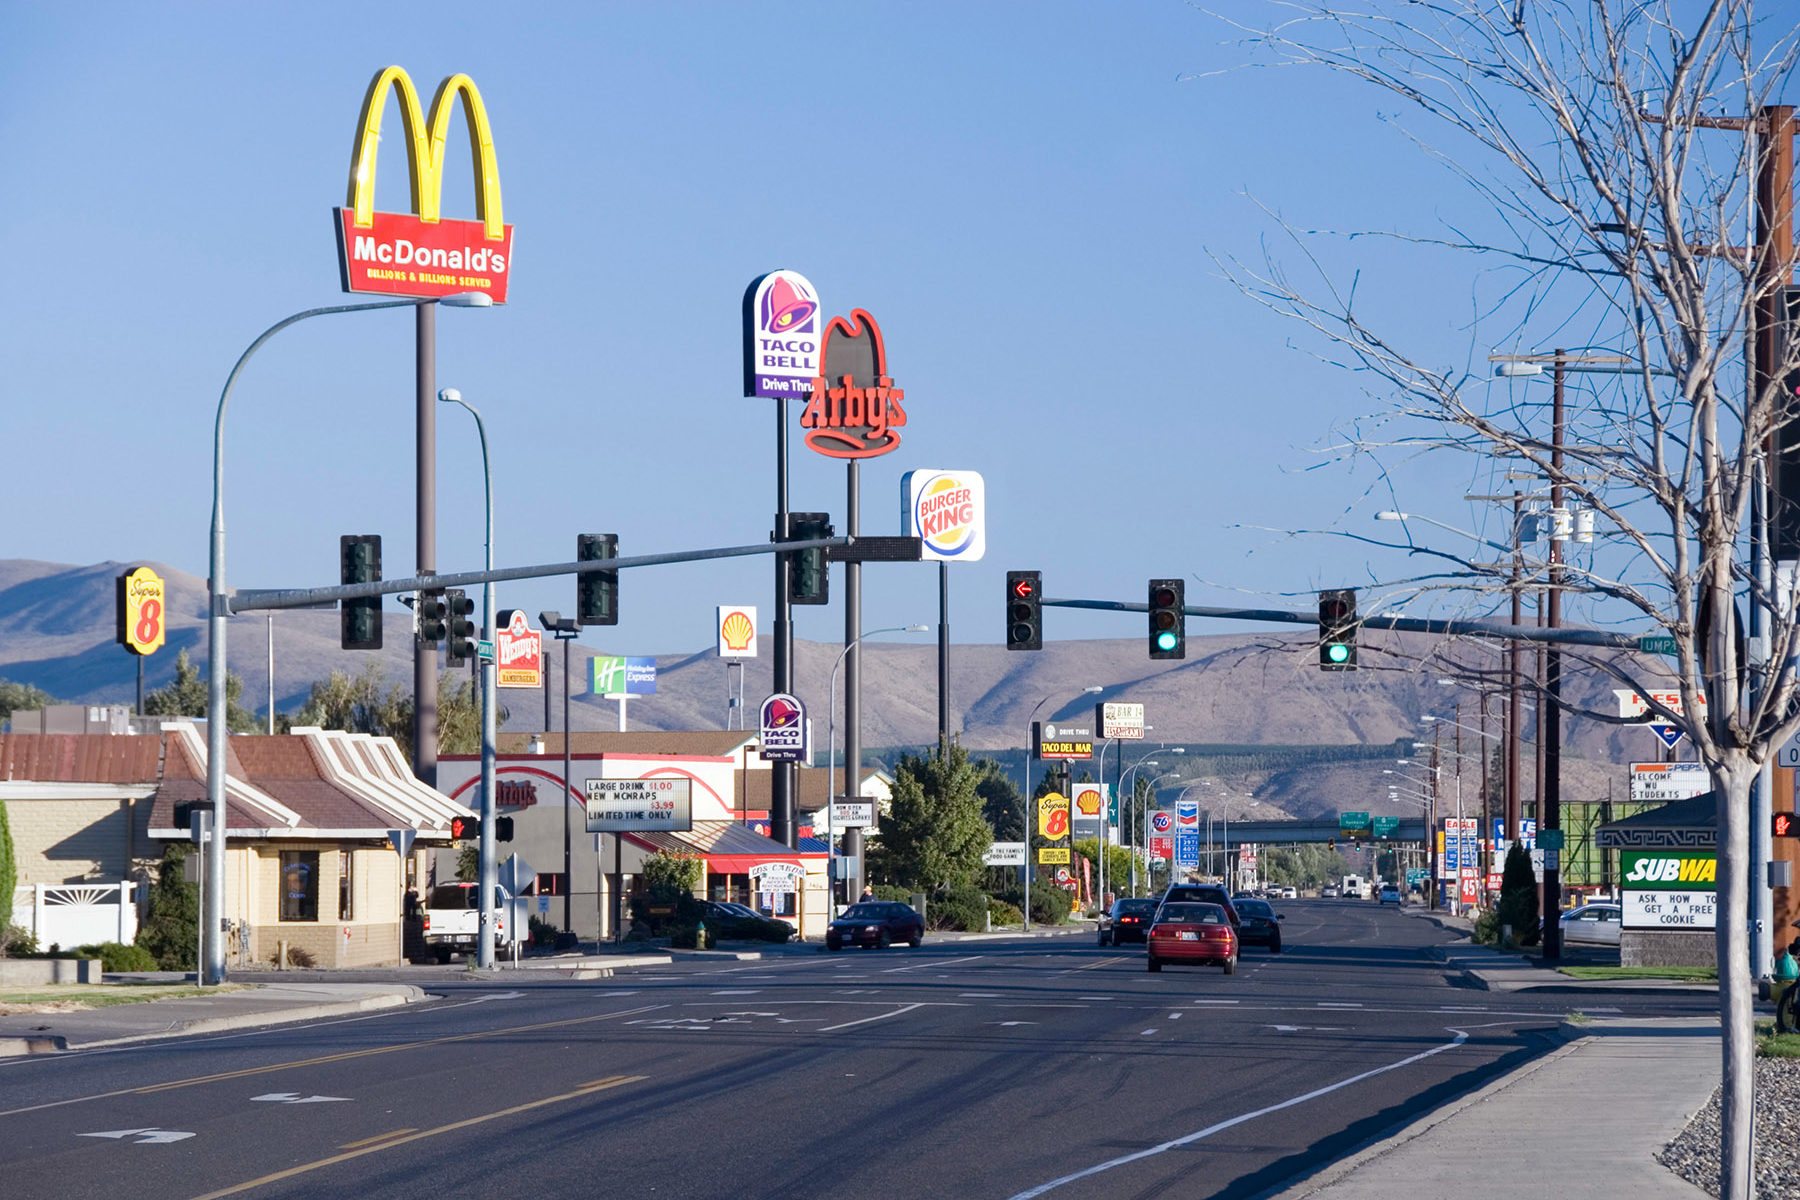 Street full of fast food restaurants such as McDonald's, Taco Bell, Arby's and Burger King